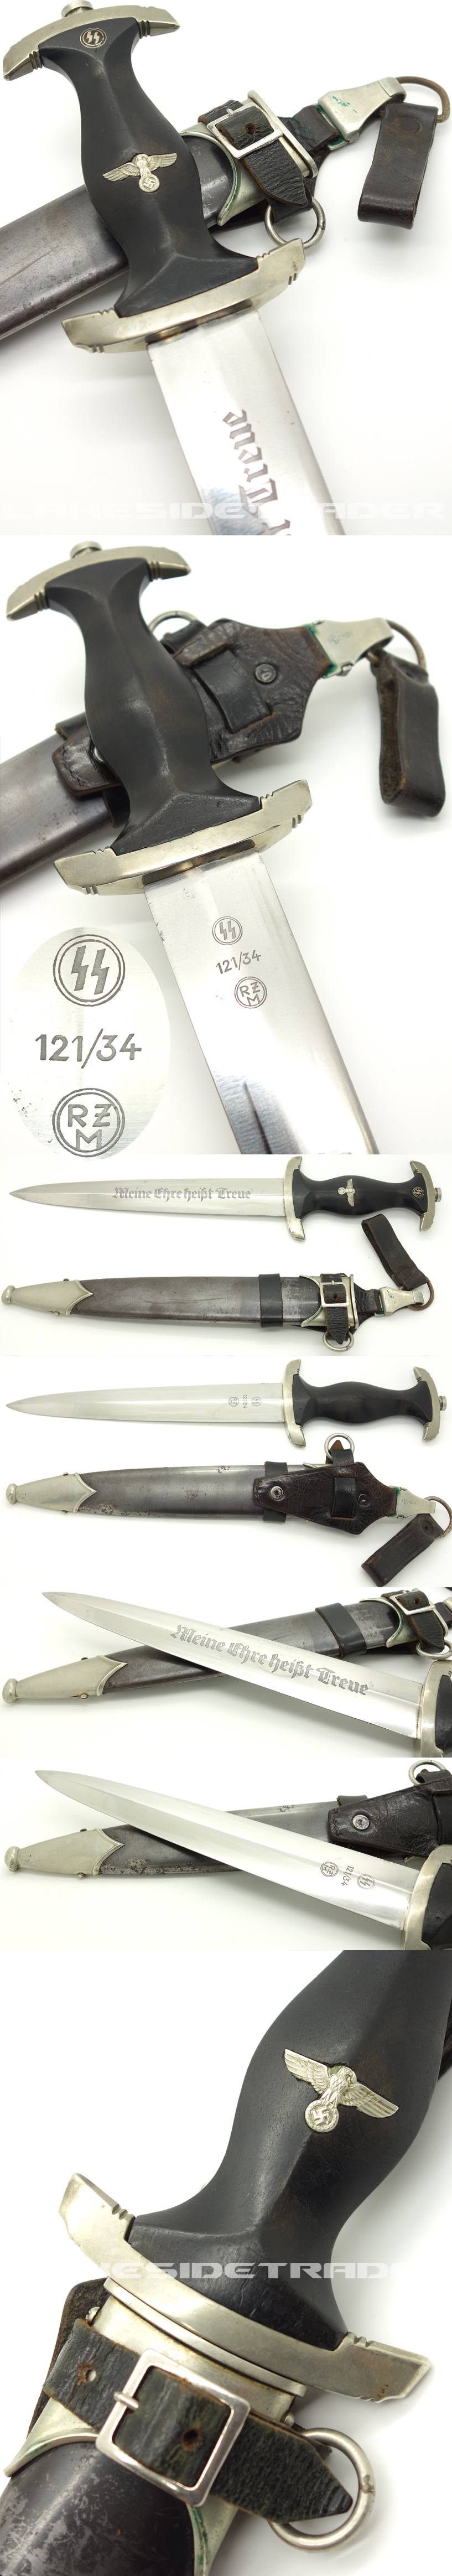 Early SS Dagger by RZM 121/34